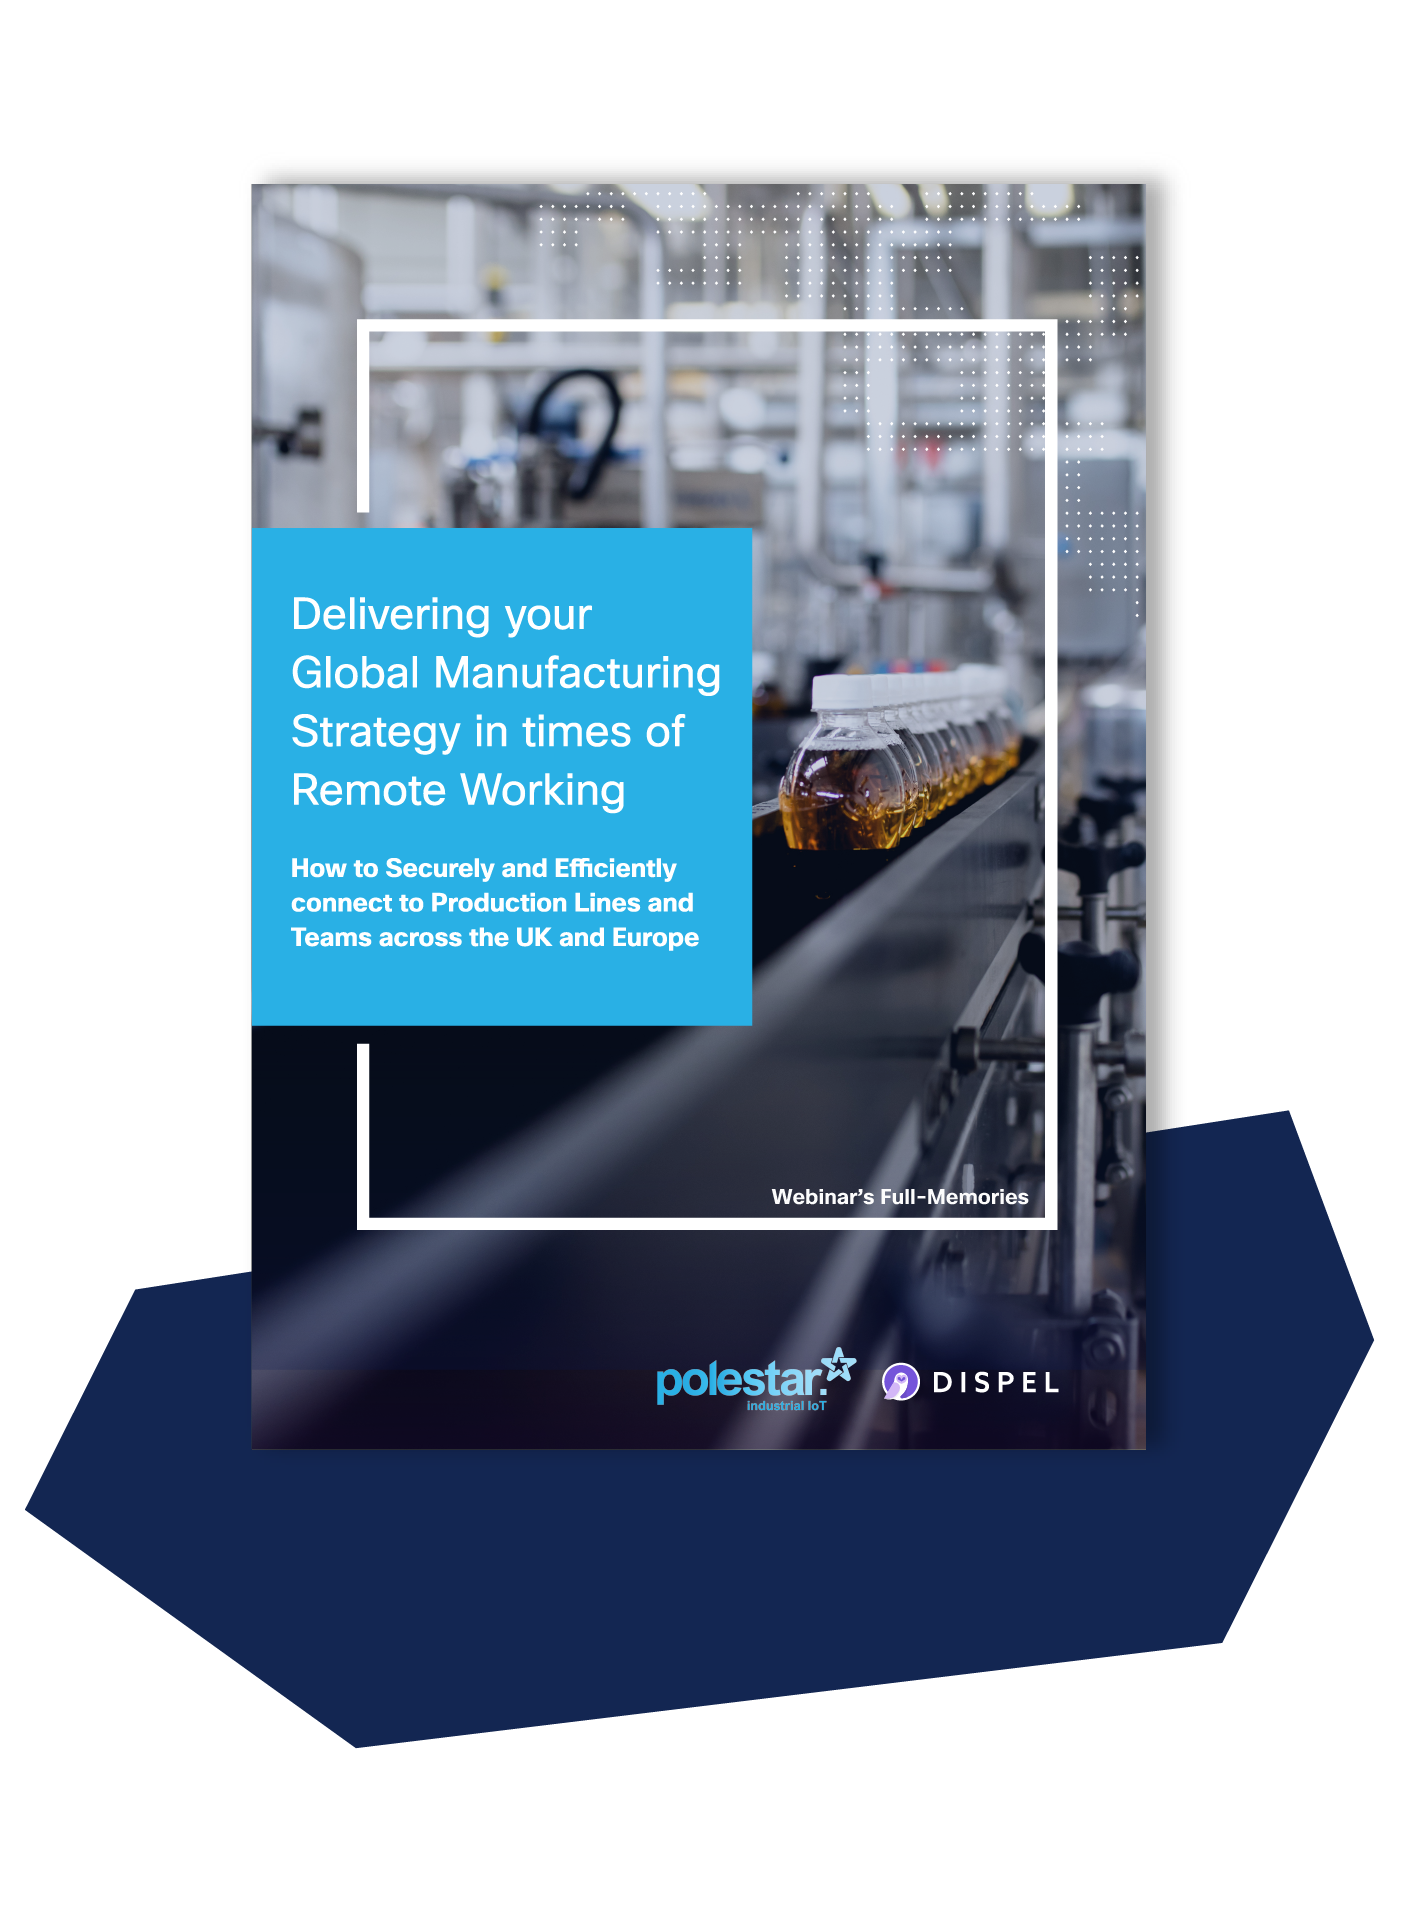 IIoT, Global Manufacturing Strategy, Remote Working, Remote Manufacturing